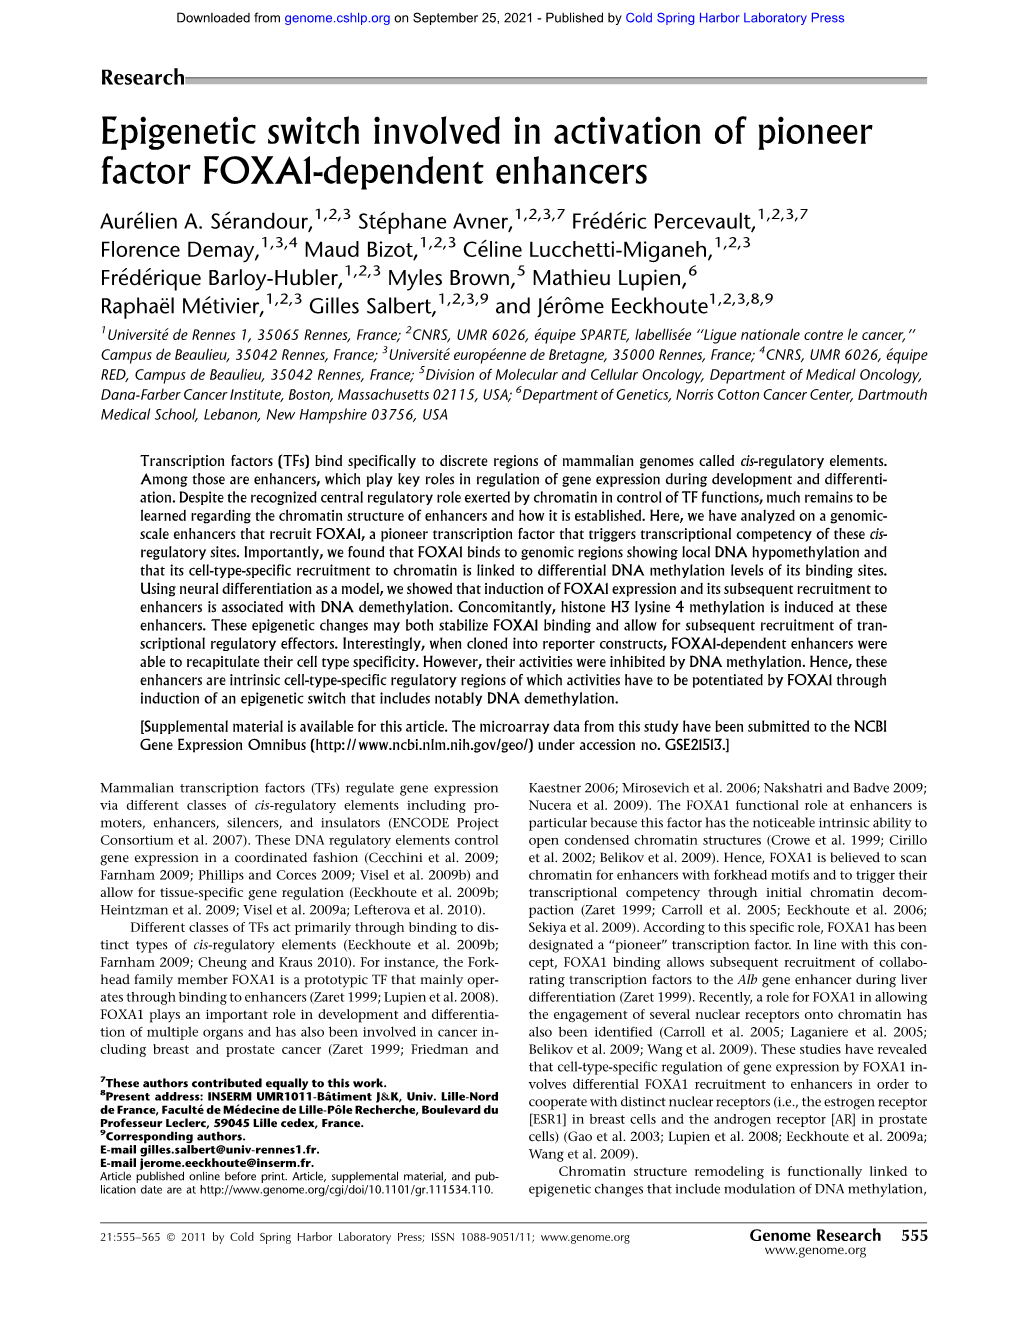 Epigenetic Switch Involved in Activation of Pioneer Factor FOXA1-Dependent Enhancers